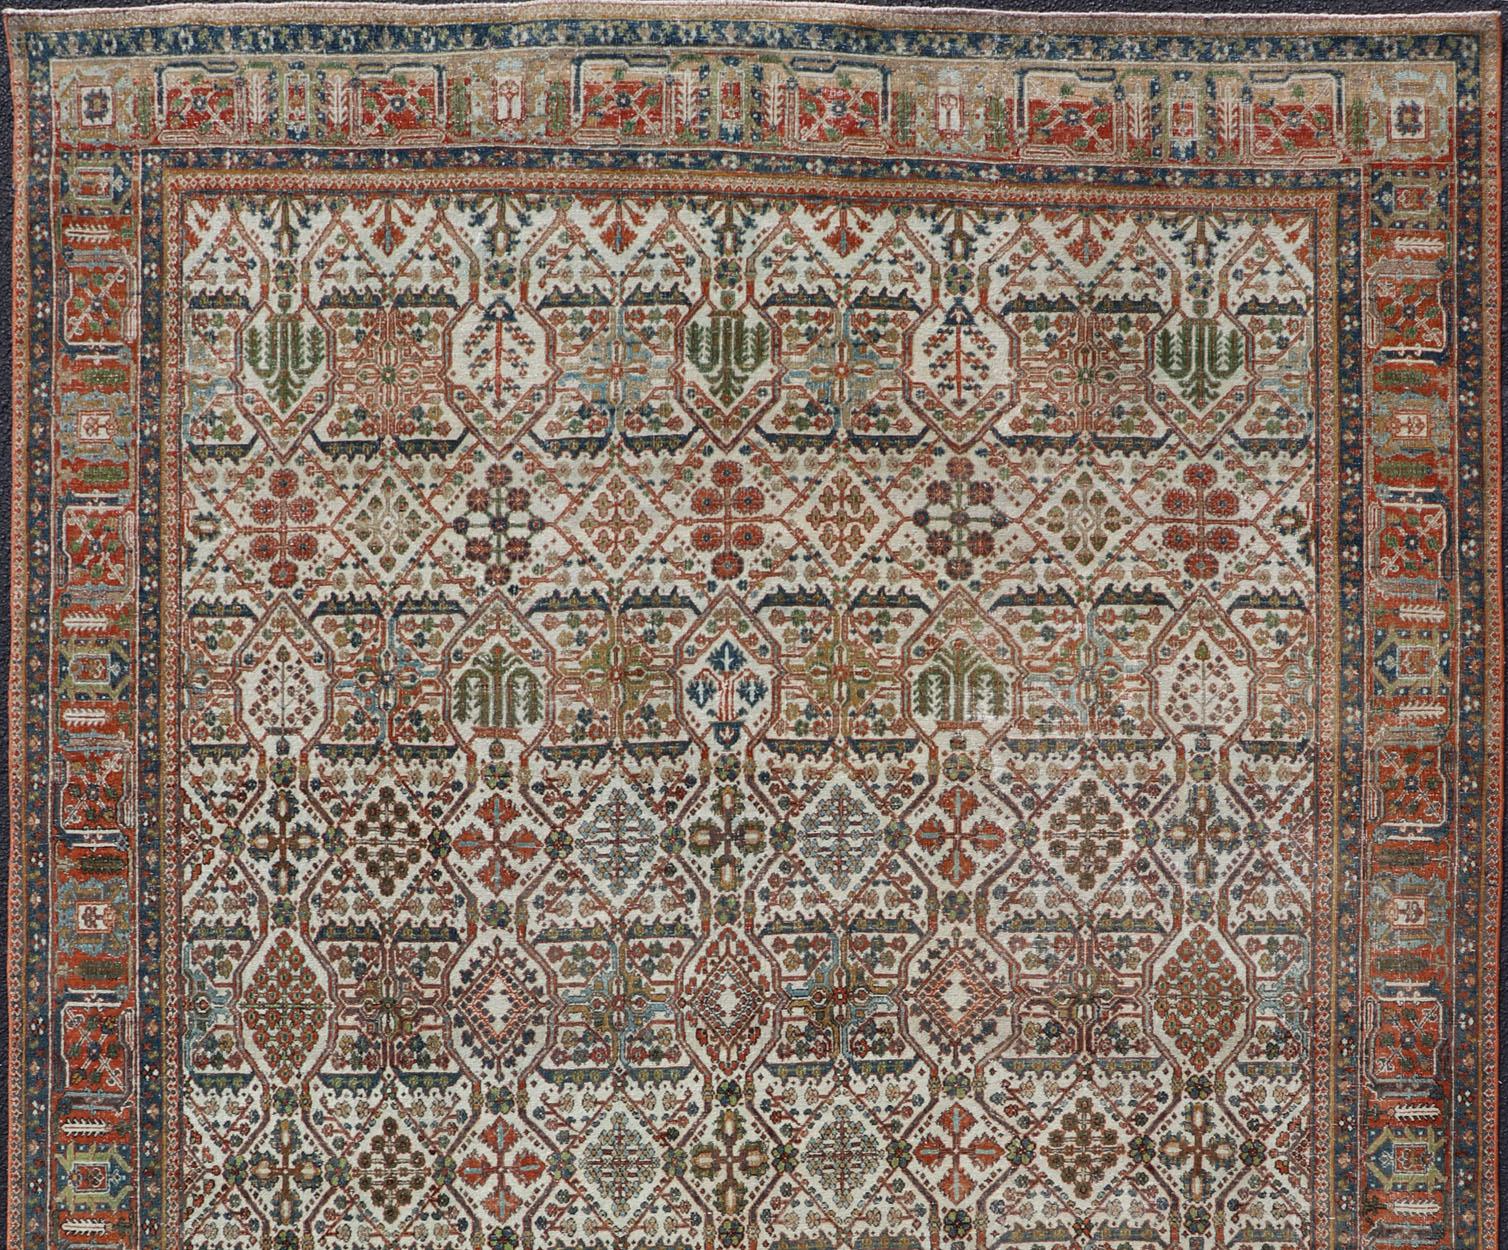 Antique Persian Joshegan Rug in Ivory Background With Blue, Green, & Copper  In Good Condition For Sale In Atlanta, GA